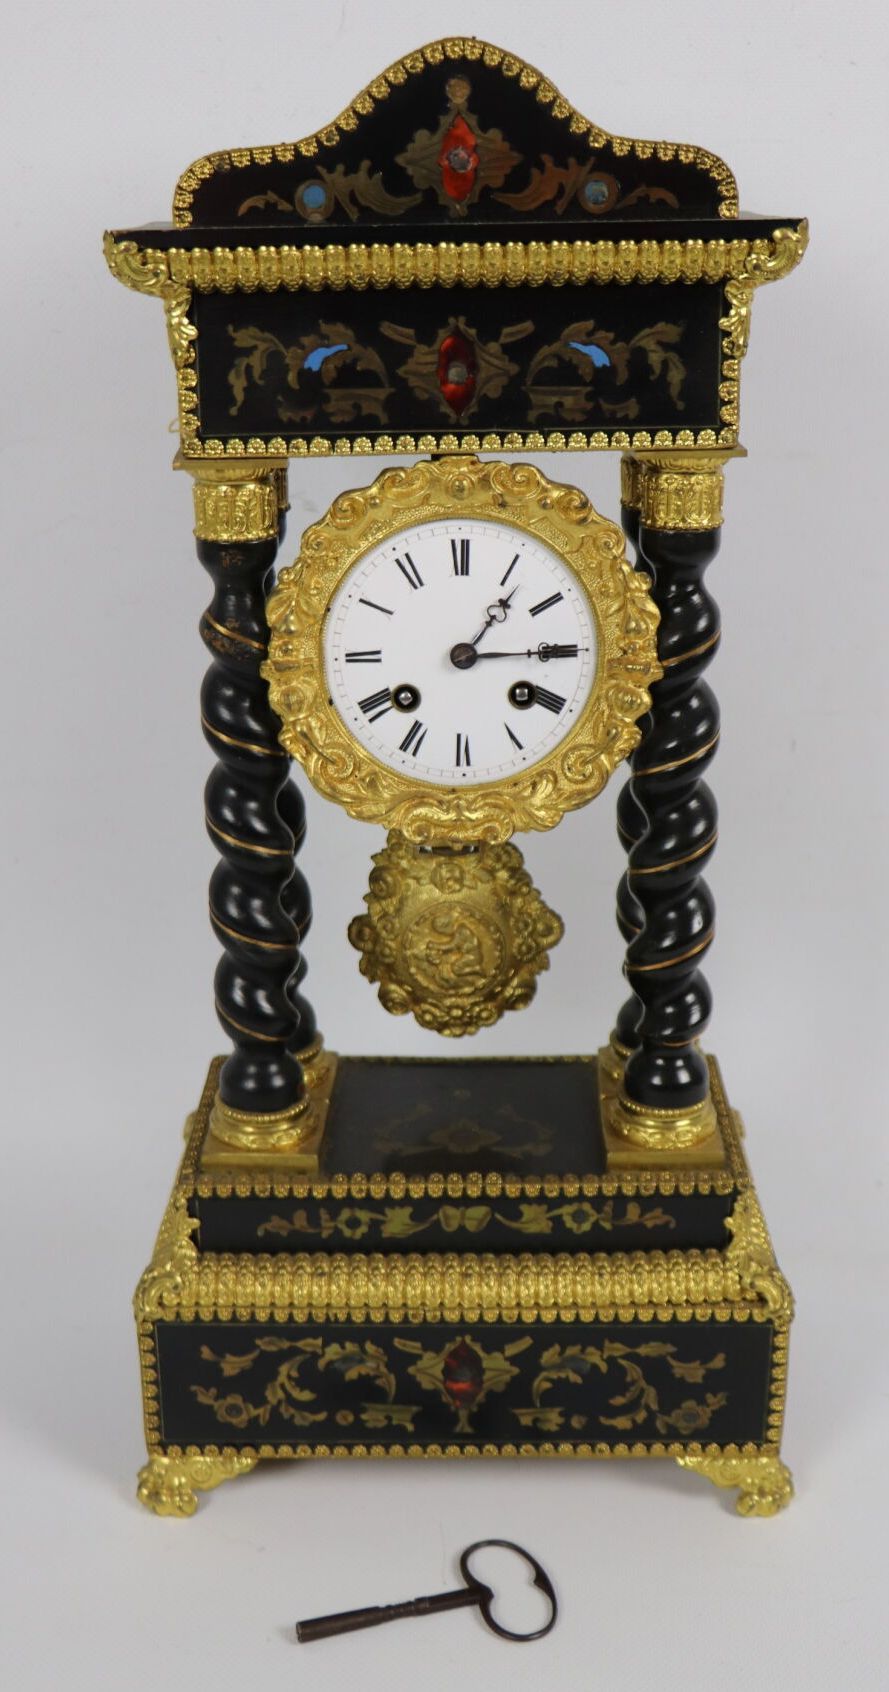 Null Portico clock in blackened wood and gilded brass marquetry, with polychrome&hellip;